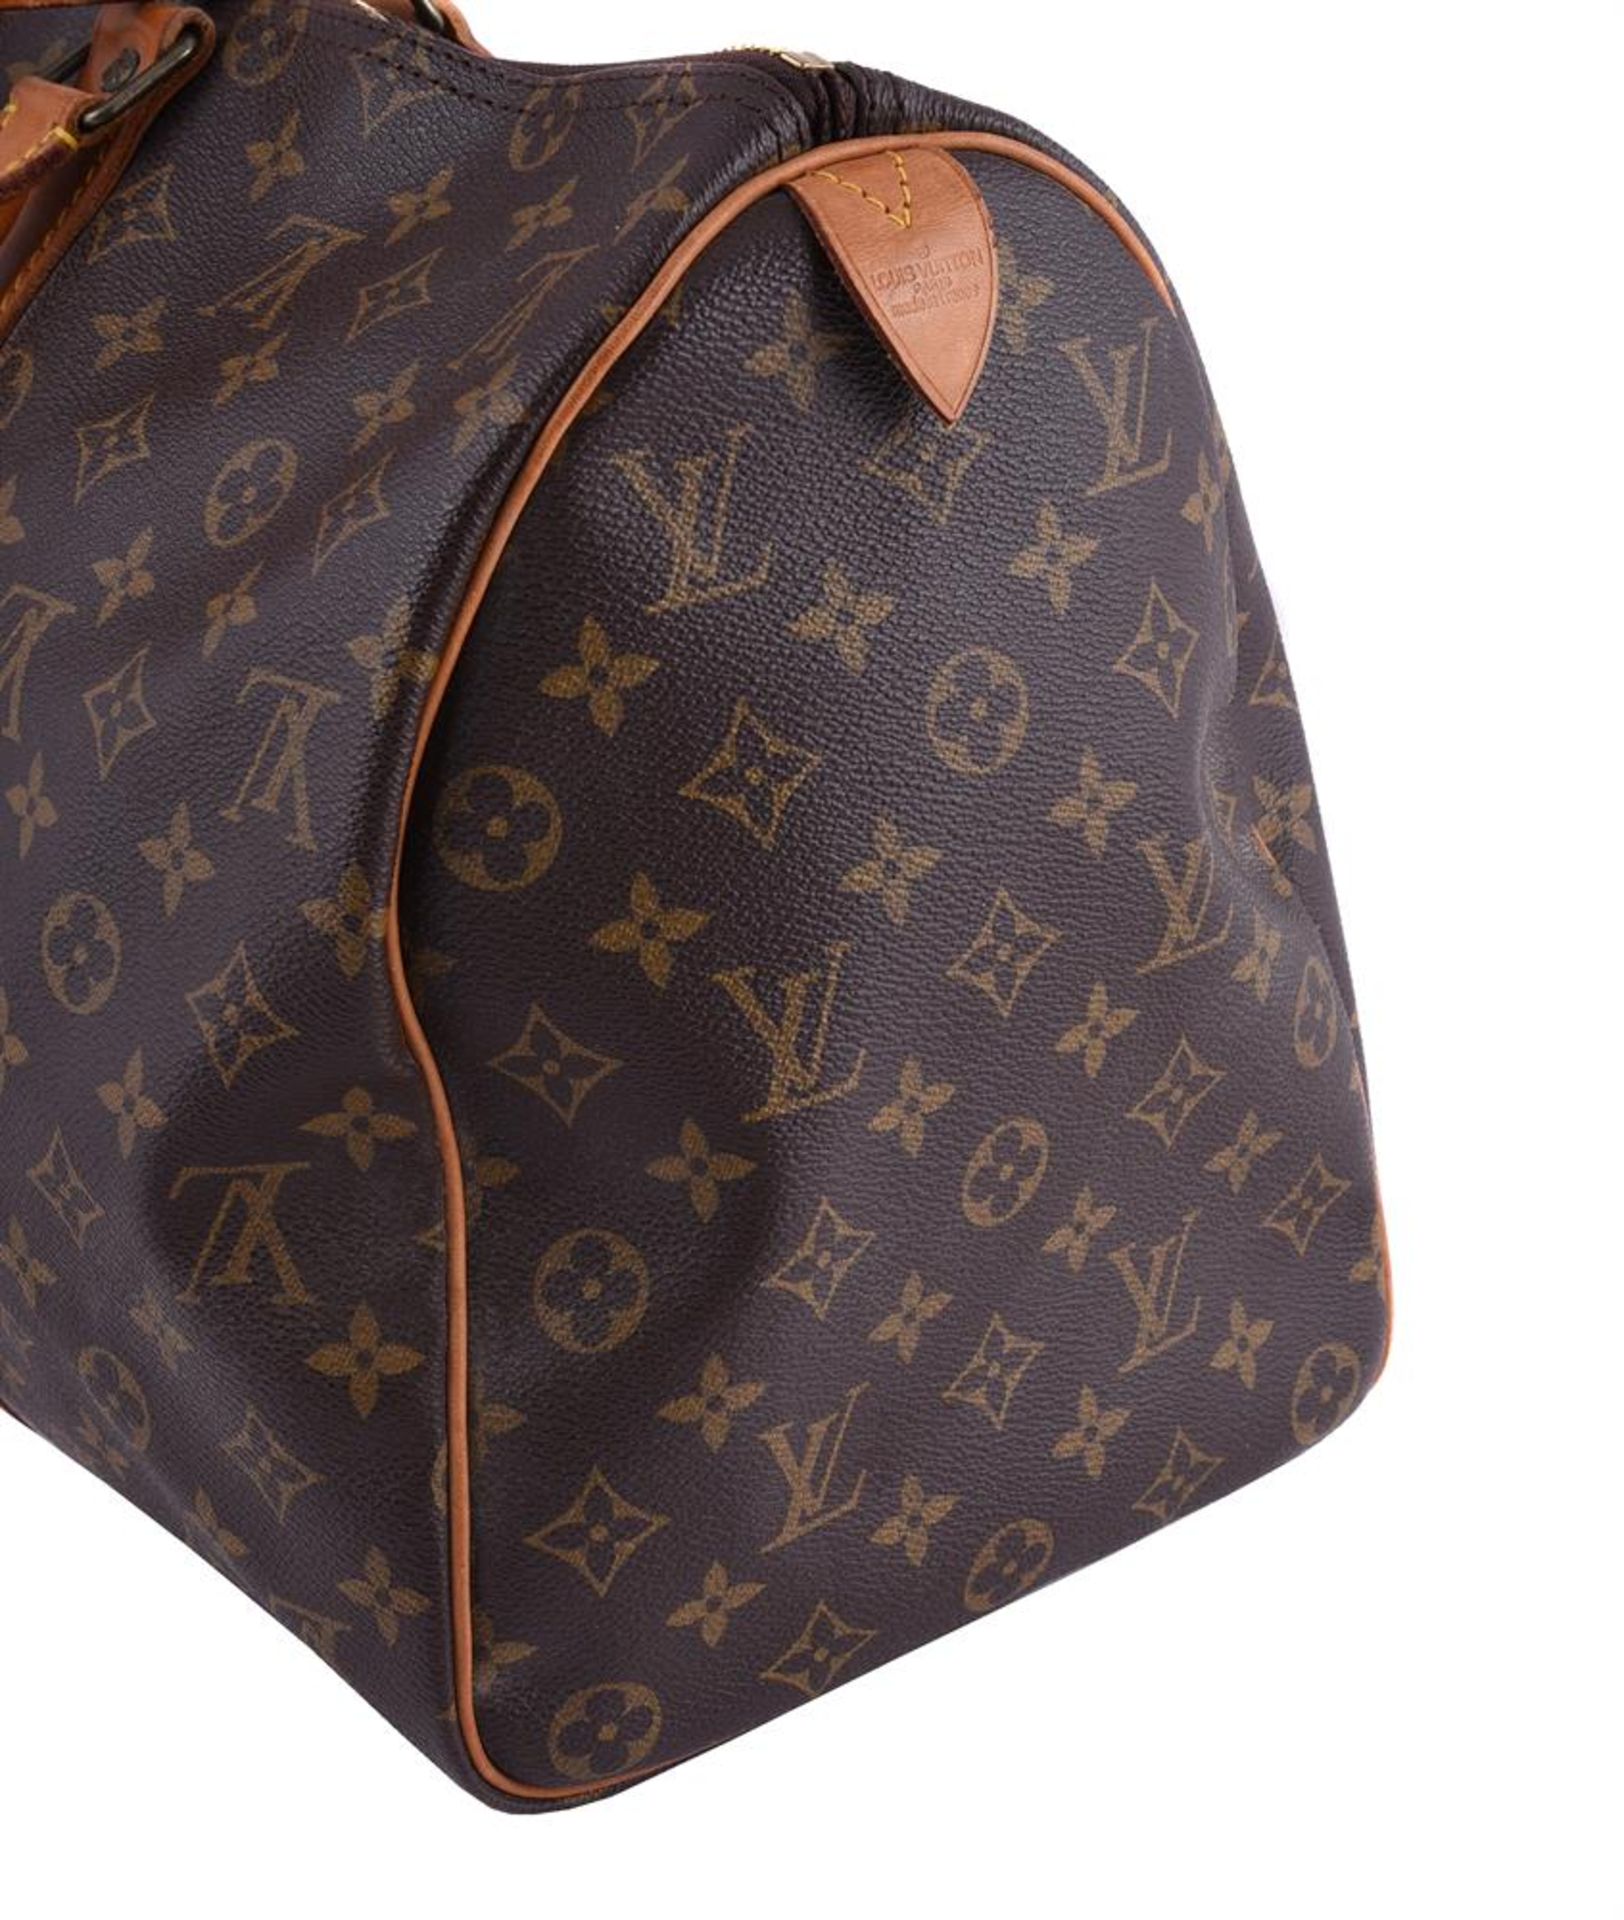 LOUIS VUITTON MONOGRAM, KEEPALL 45, A COATED CANVAS AND LEATHER TRAVEL BAG - Image 2 of 3